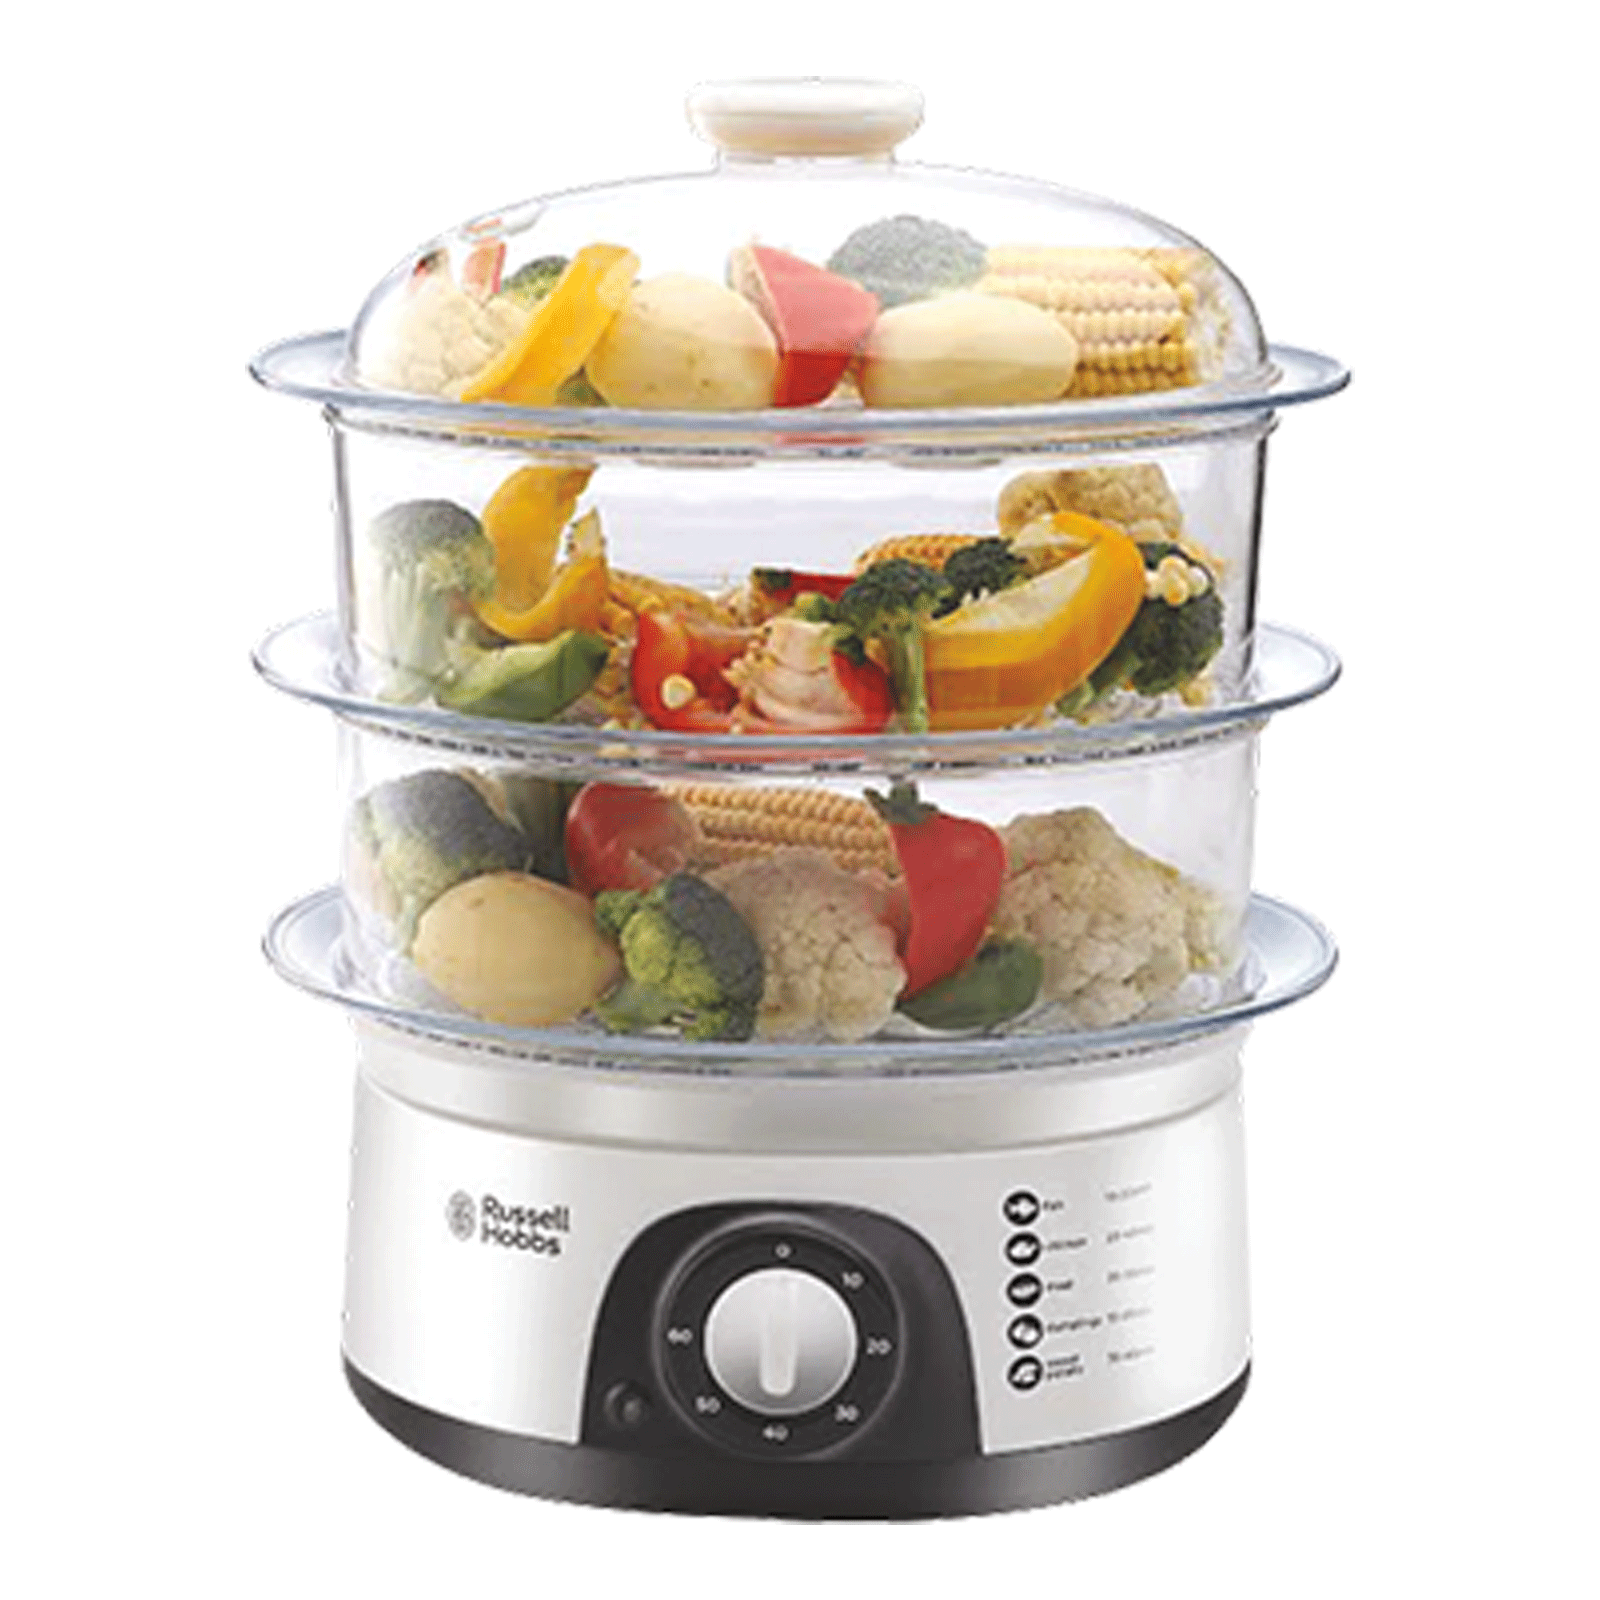 Russell Hobbs 9 Litre Electric Food Steamer (Transparent Lid, RFS800, White)